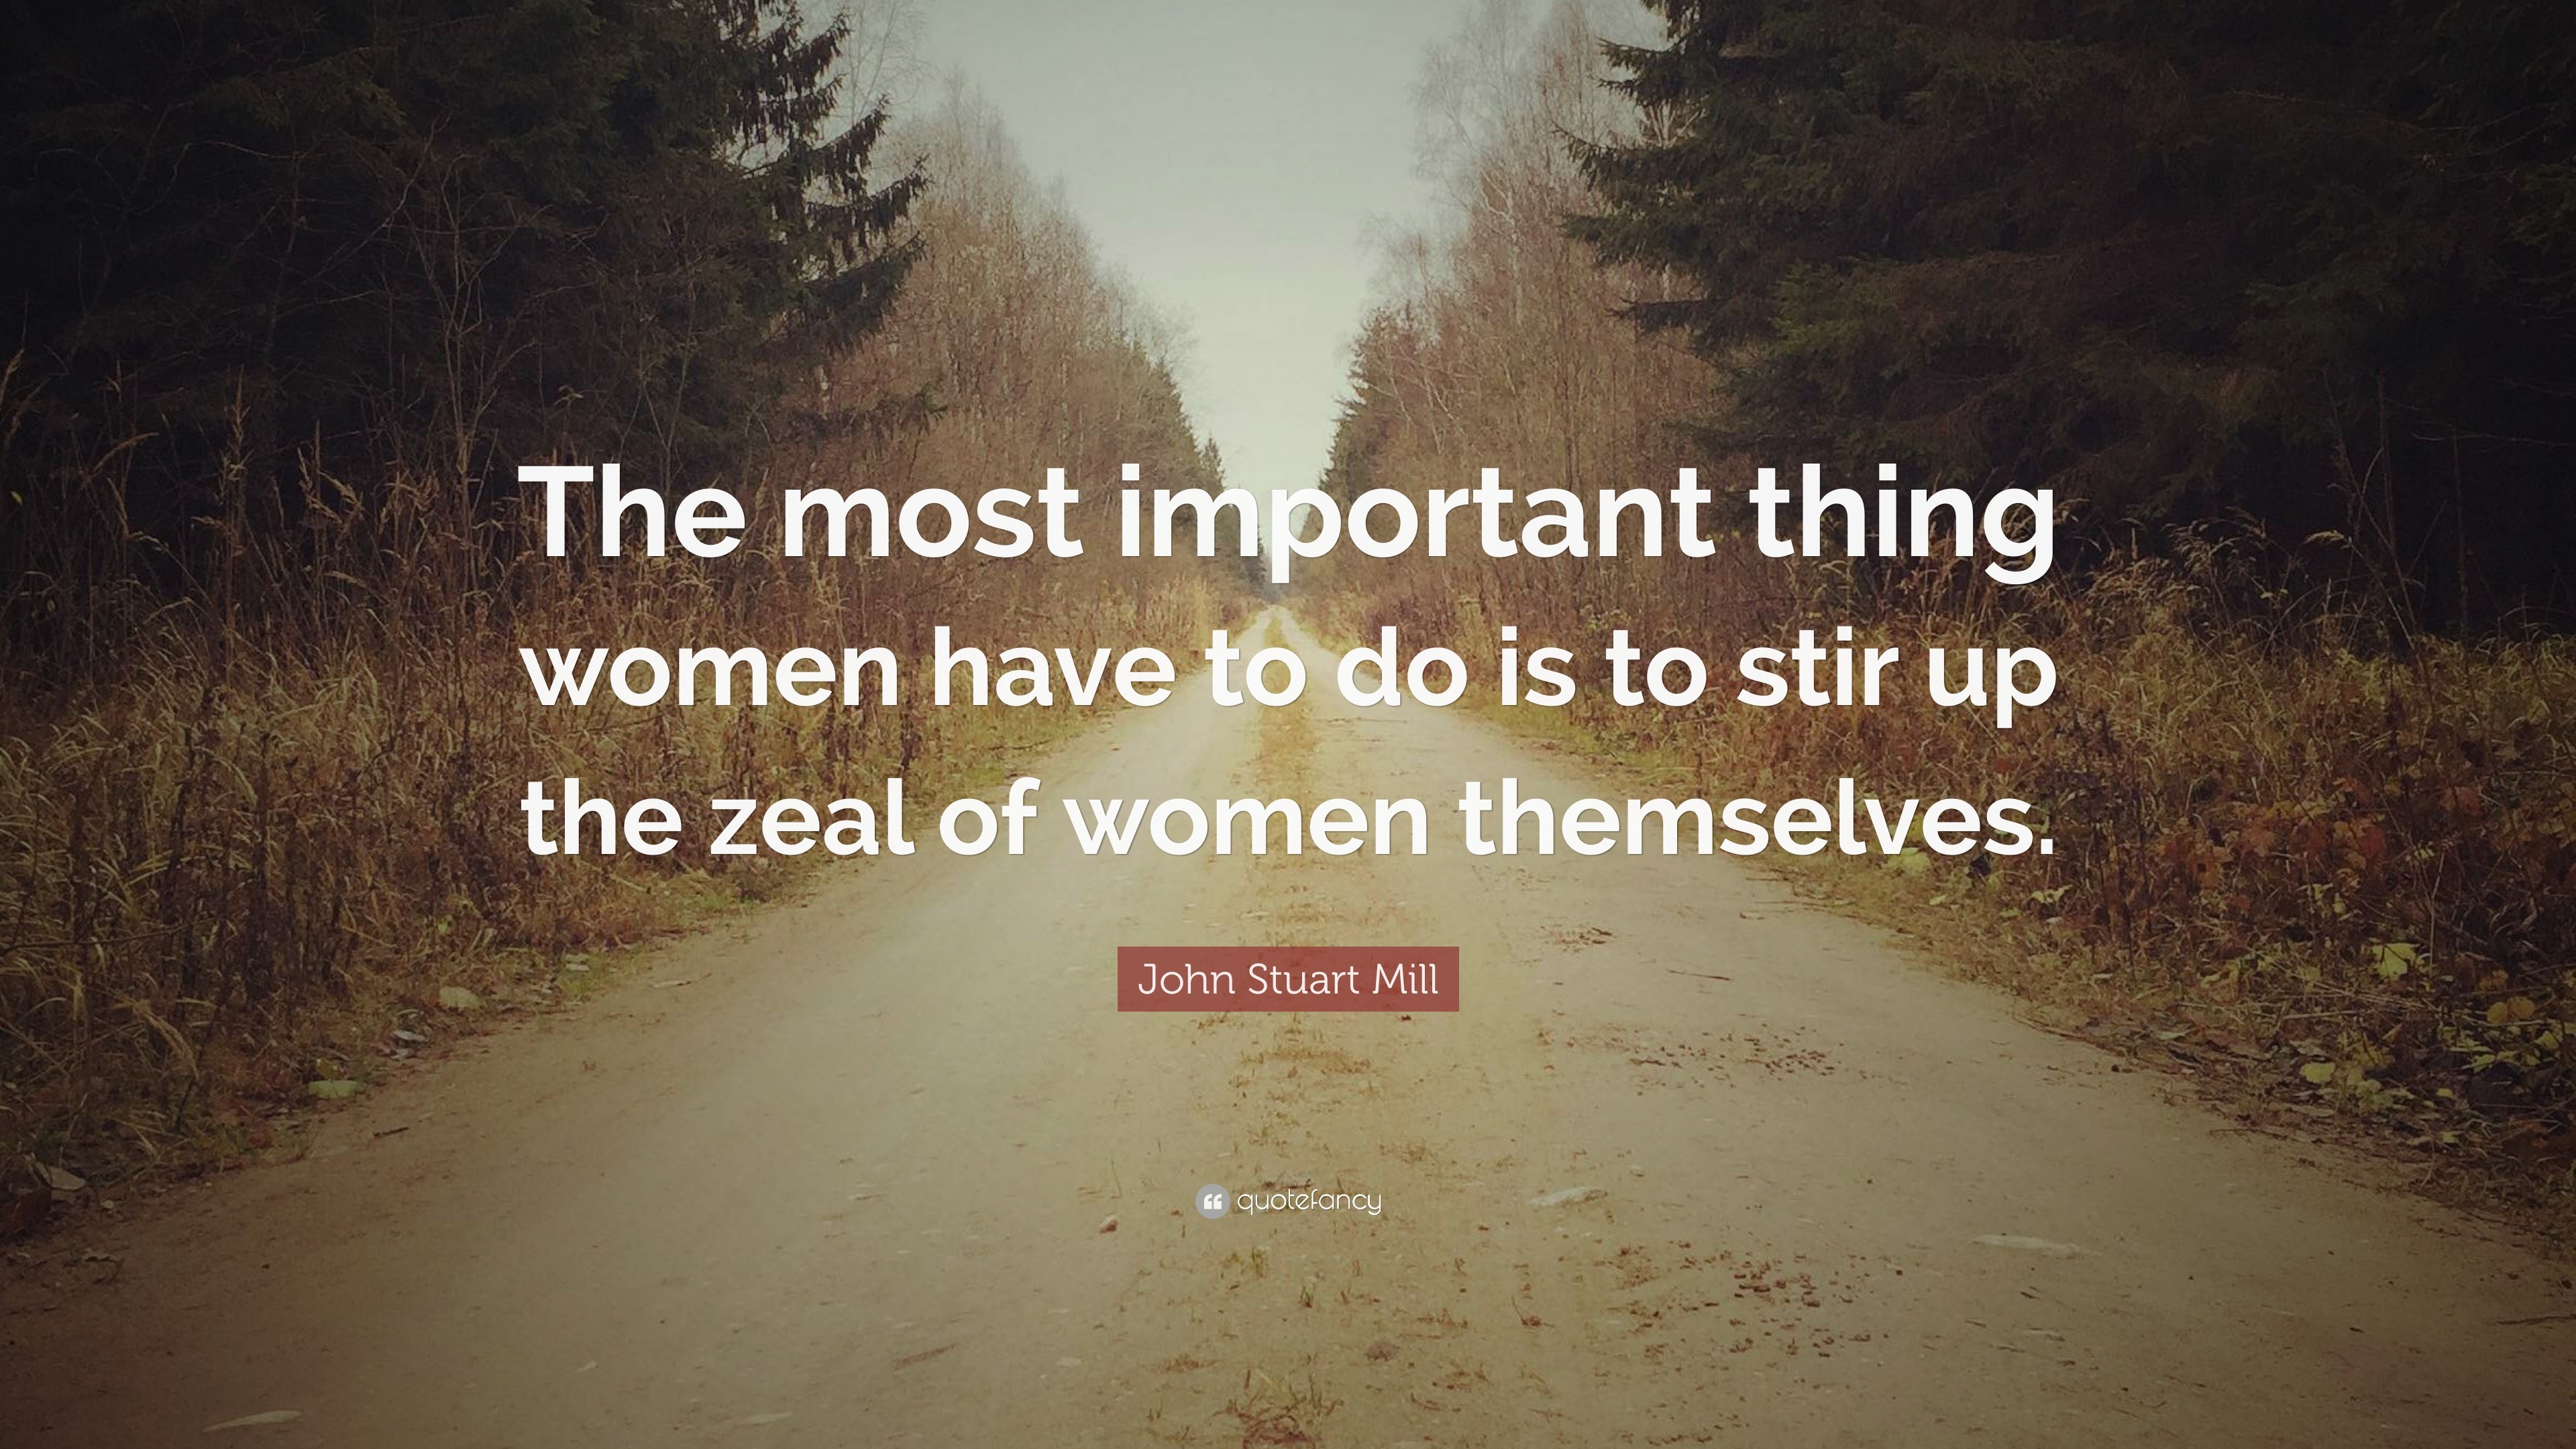 John Stuart Mill Quote: “The most important thing women have to do is ...